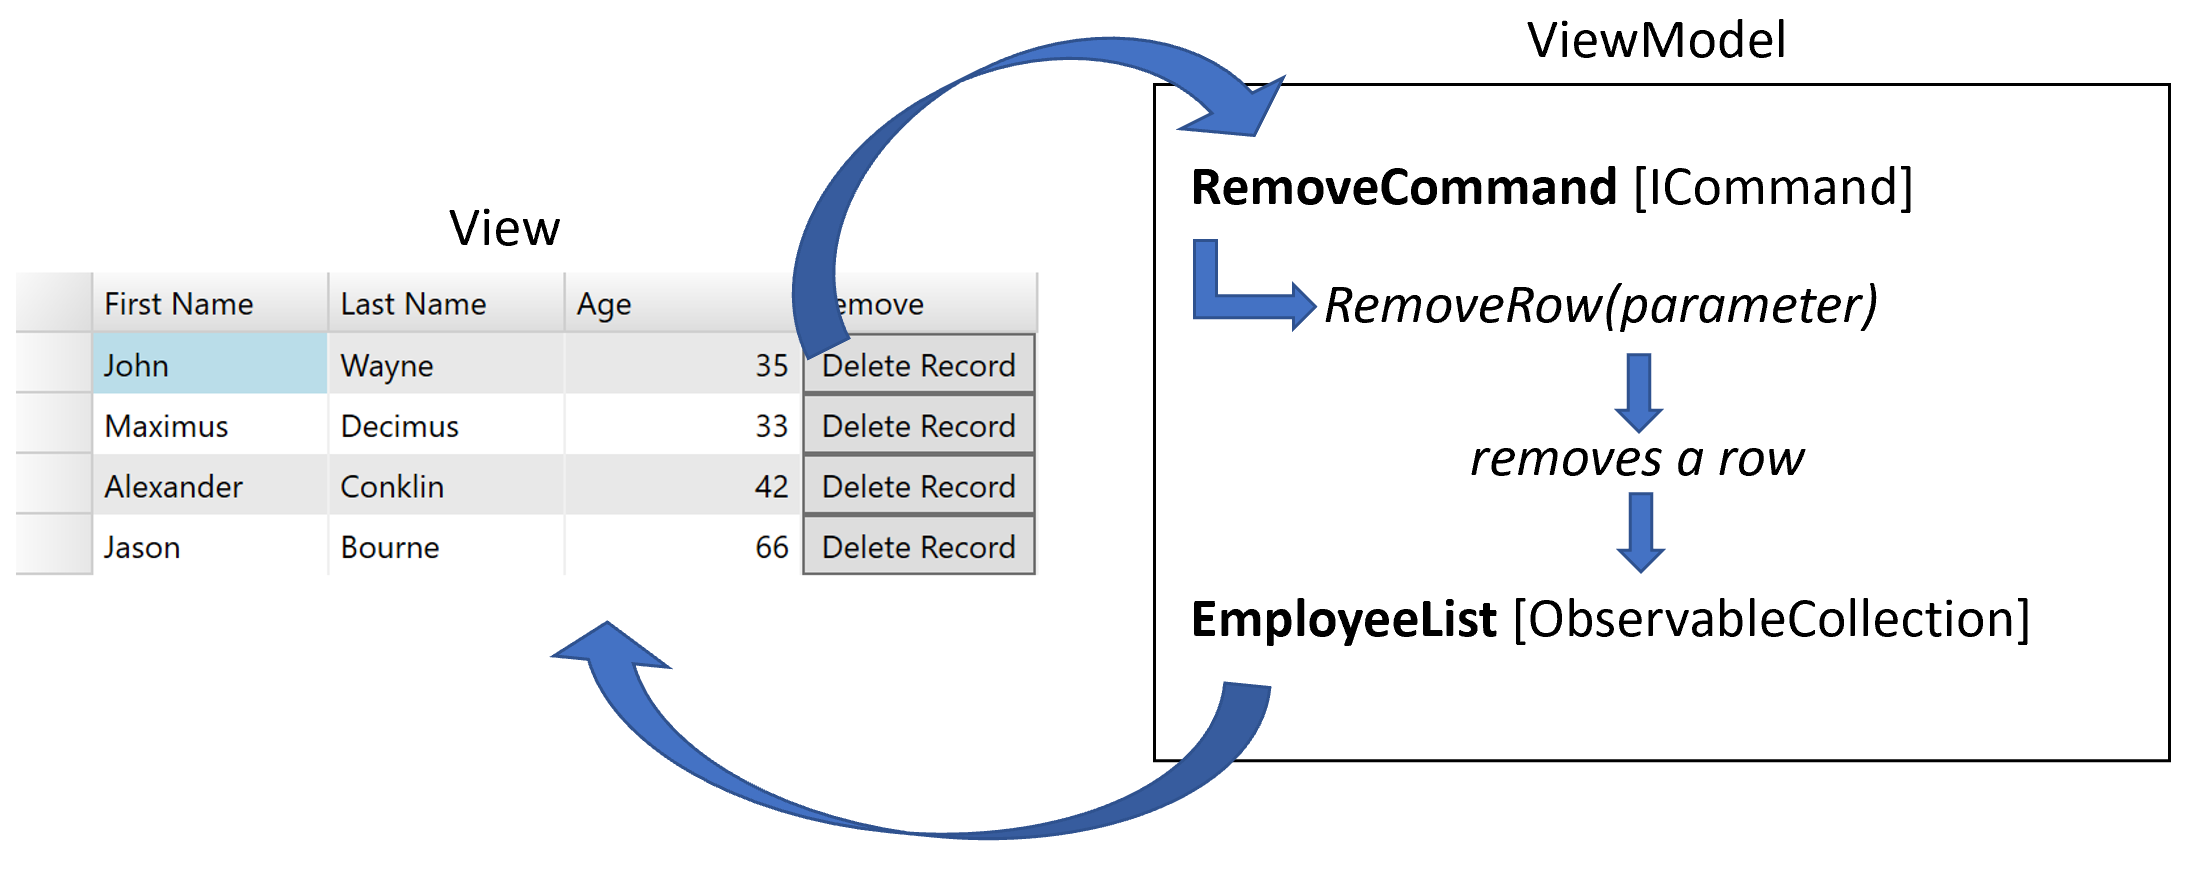 Using Mvvm To Remove Rows From A Wpf Datagrid | Componentone